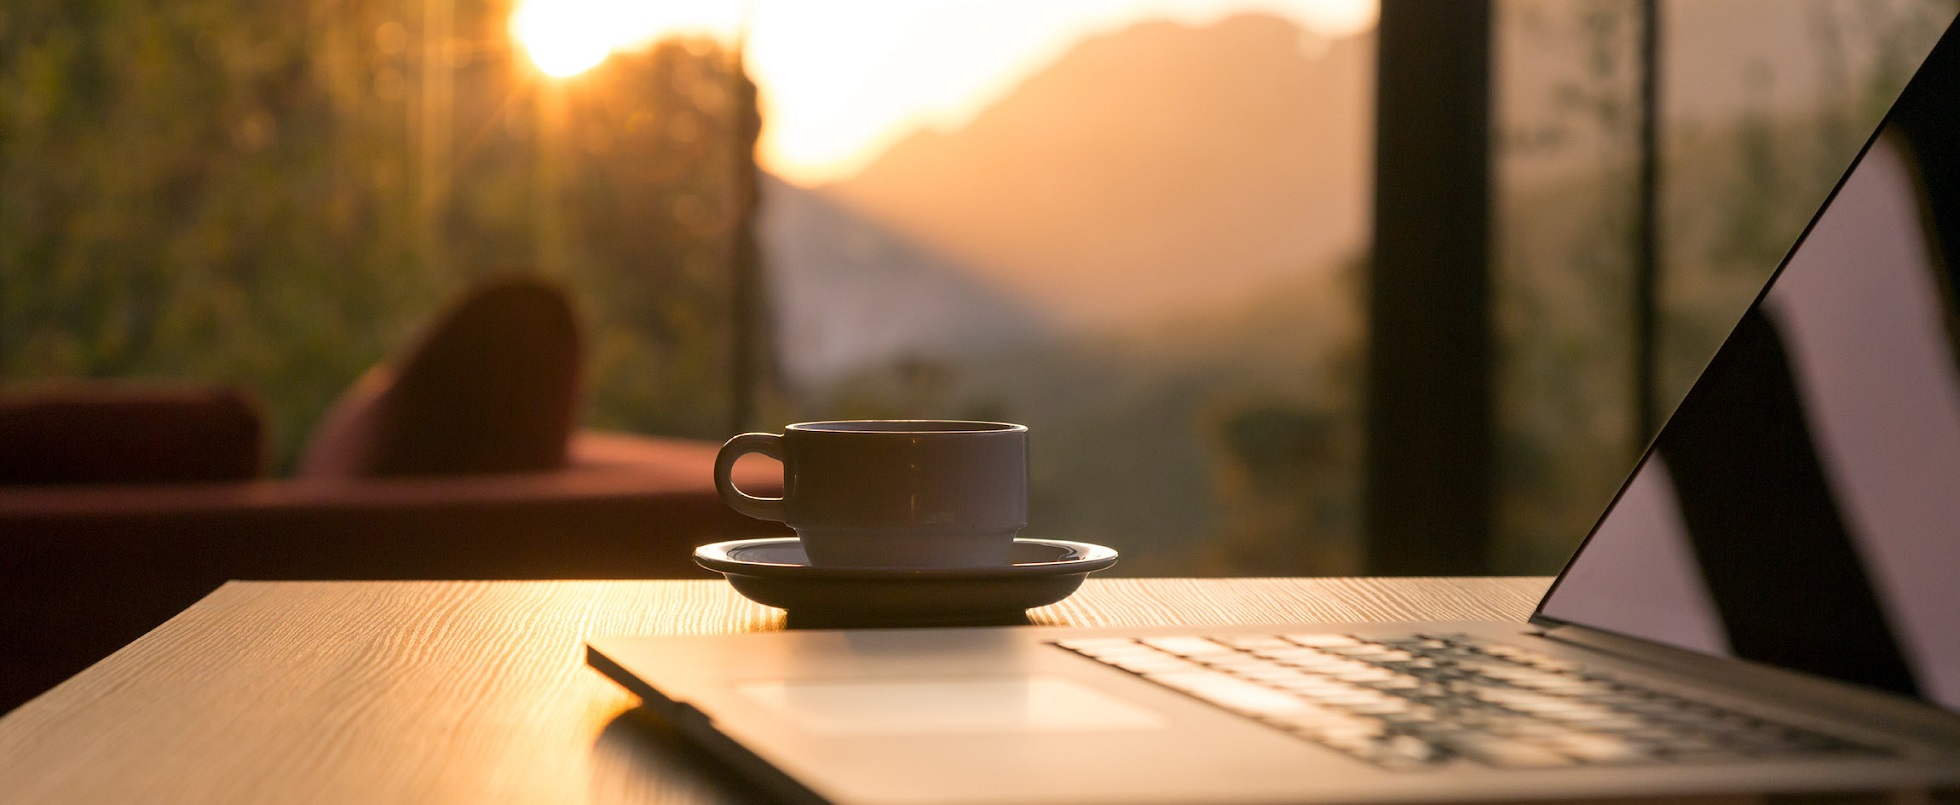 Laptop and mug of coffee in a sunset